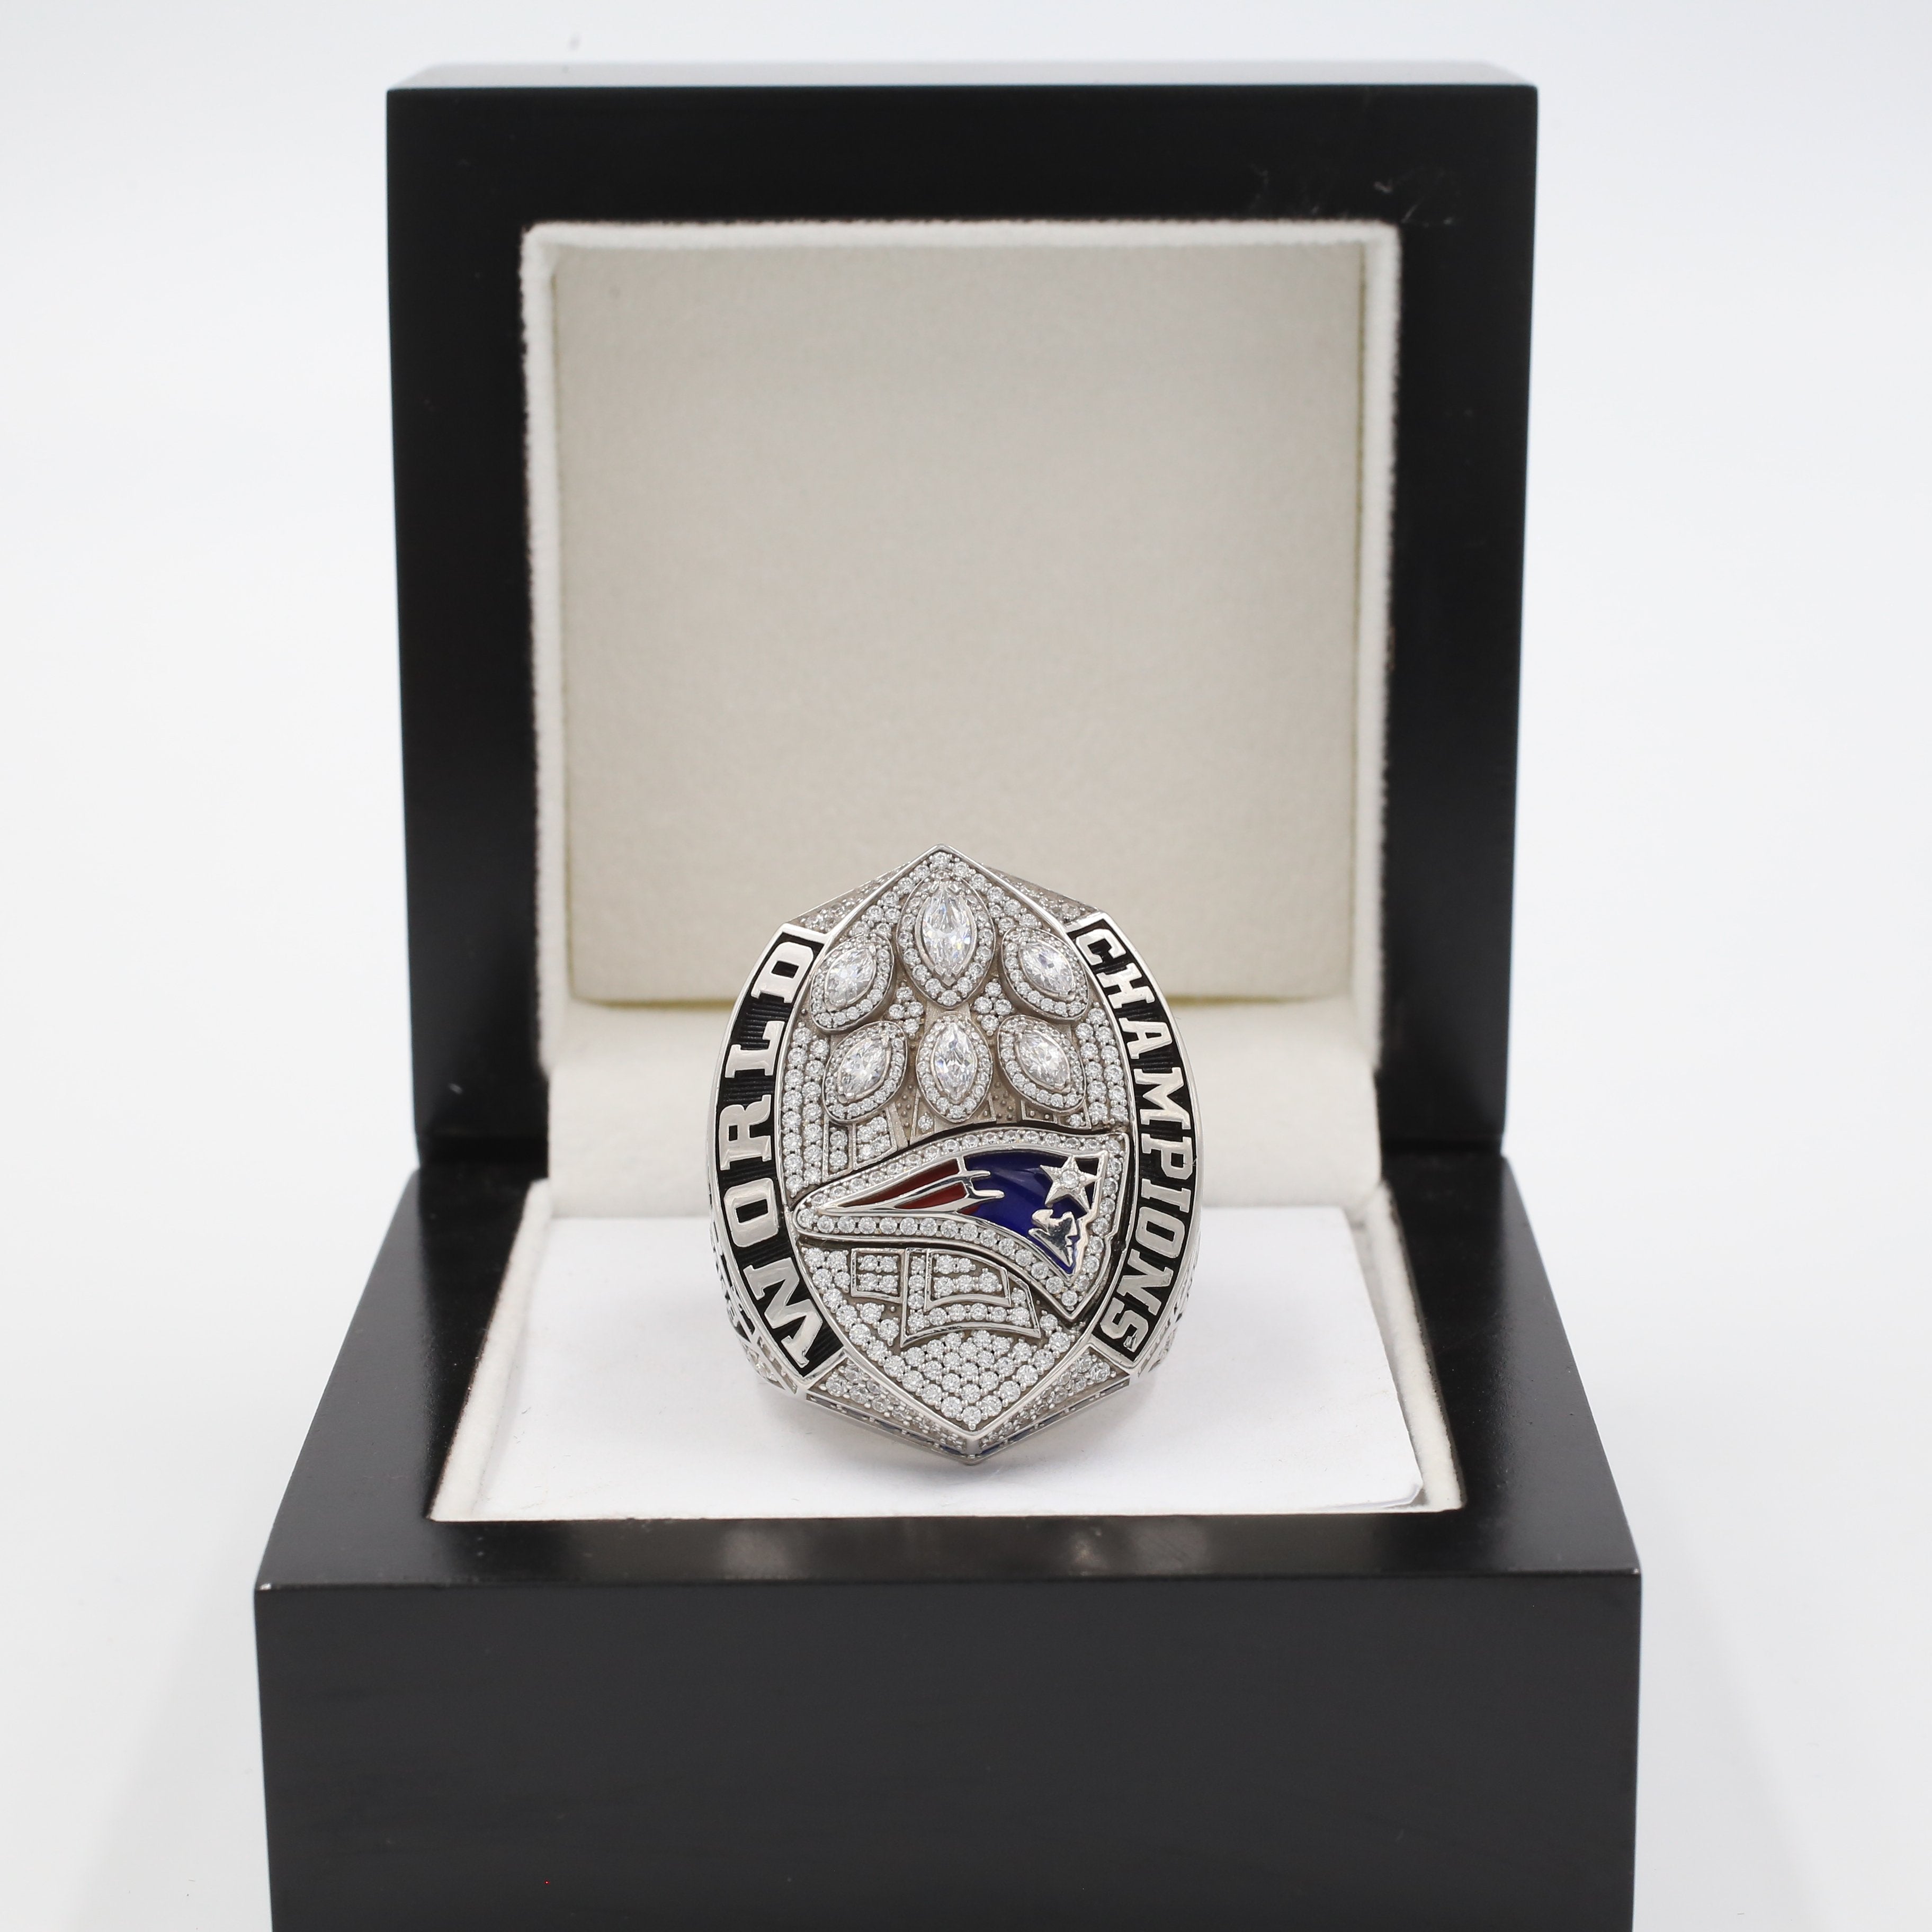 48 Mind Blowing Photos Of Every Super Bowl Ring Ever | Super bowl rings,  New england patriots, Patriots